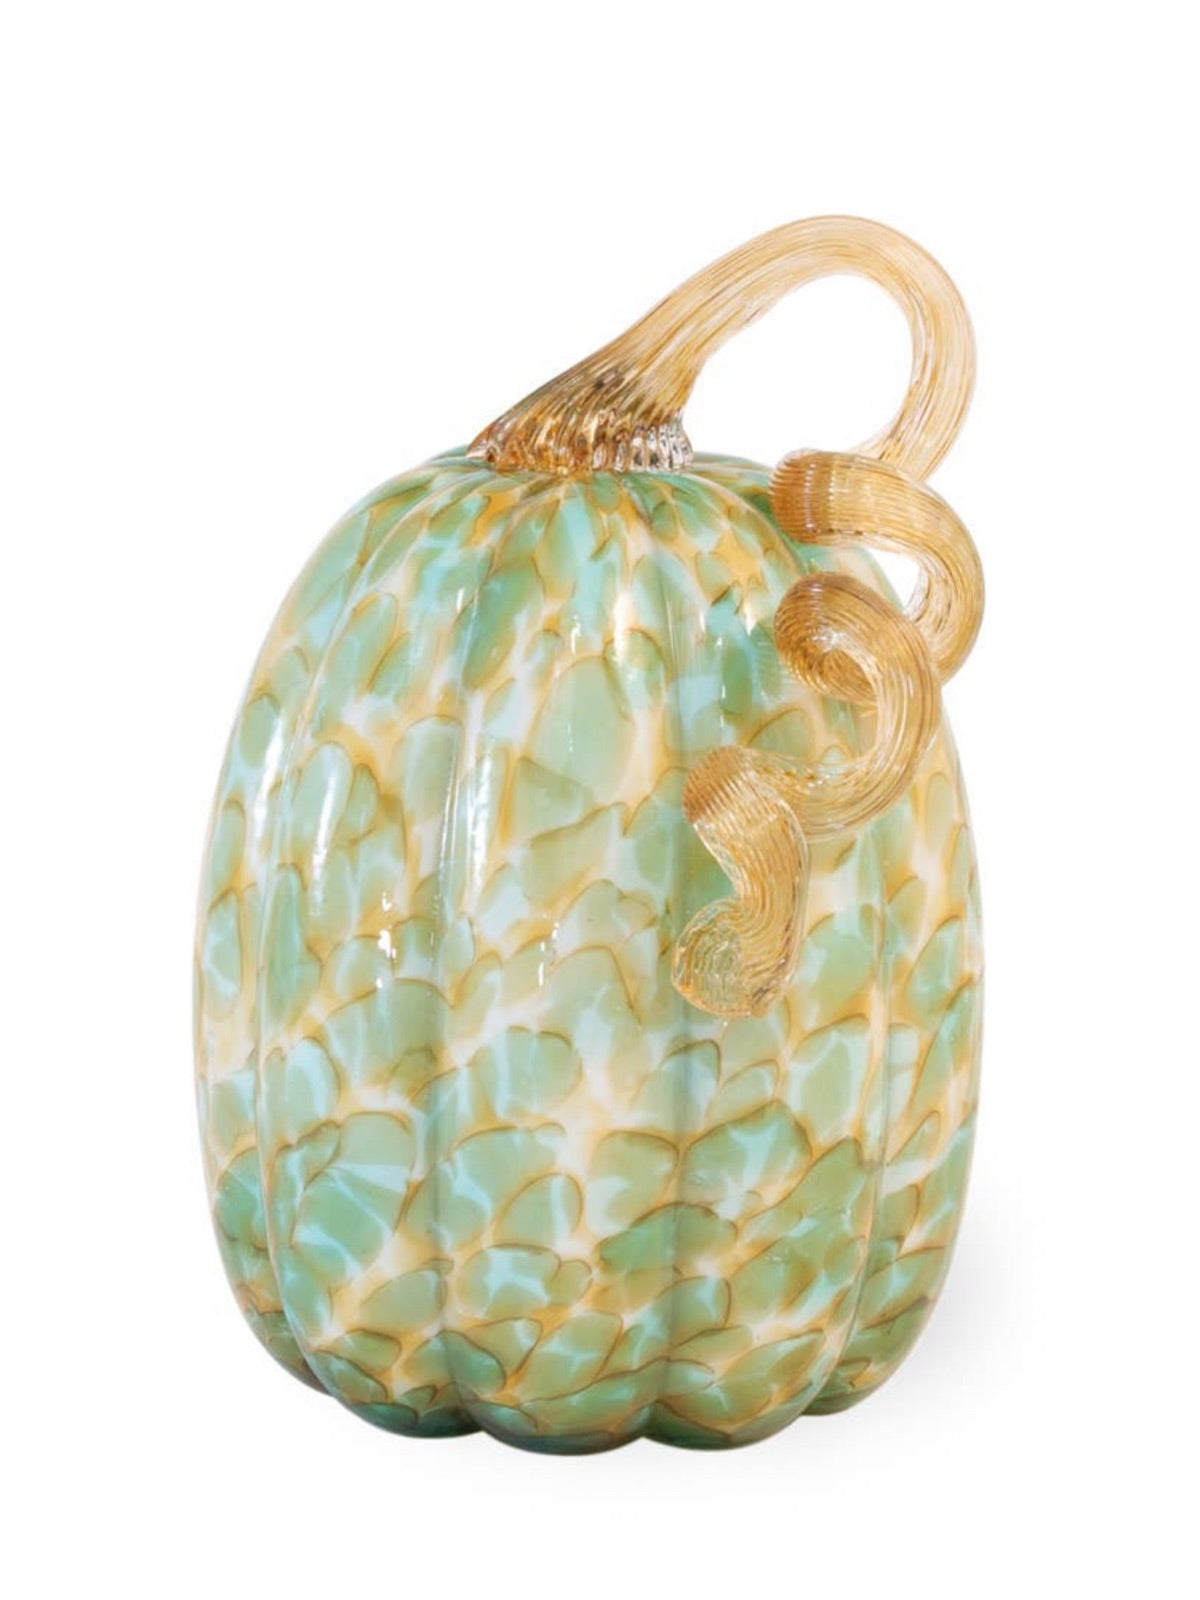 This Tall Gold & Green Glass Pumpkin is perfect for decorating your home during fall season! This hand-blown glass pumpkin features an abstract seafoam green and gold pattern with a curly gold stem. 